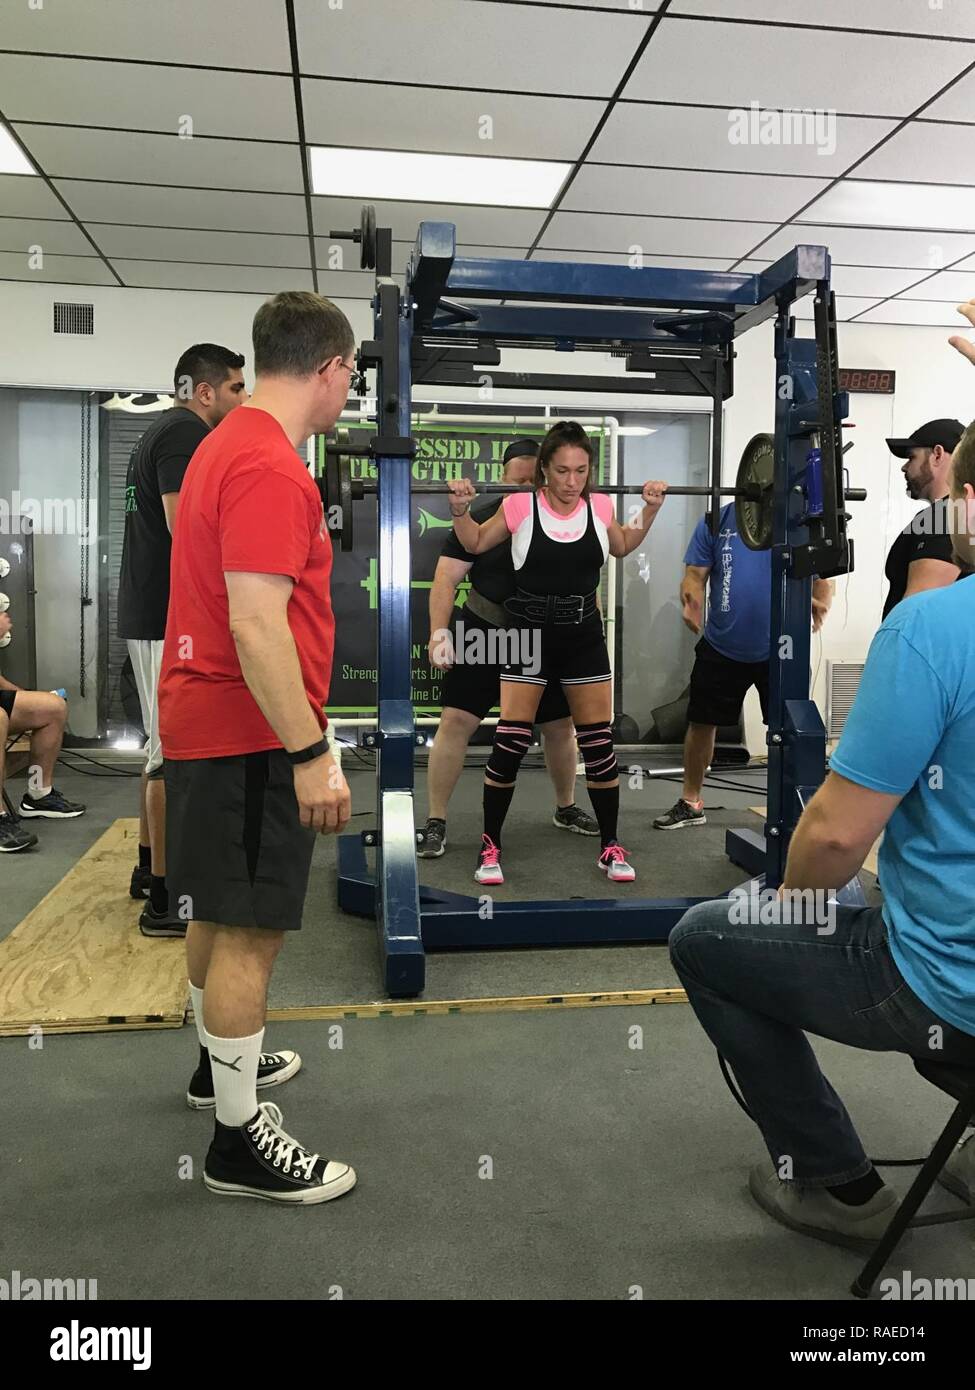 U.S. Army Sergeant First Class (SFC) Jennifer Palacios performs a squat during in the American Powerlifting Association (APA) Thunder Bay Throwdown. Palacios broke the Florida state squat record in the Raw Sub Master (33-39) age division by lifting 230lbs. Stock Photo